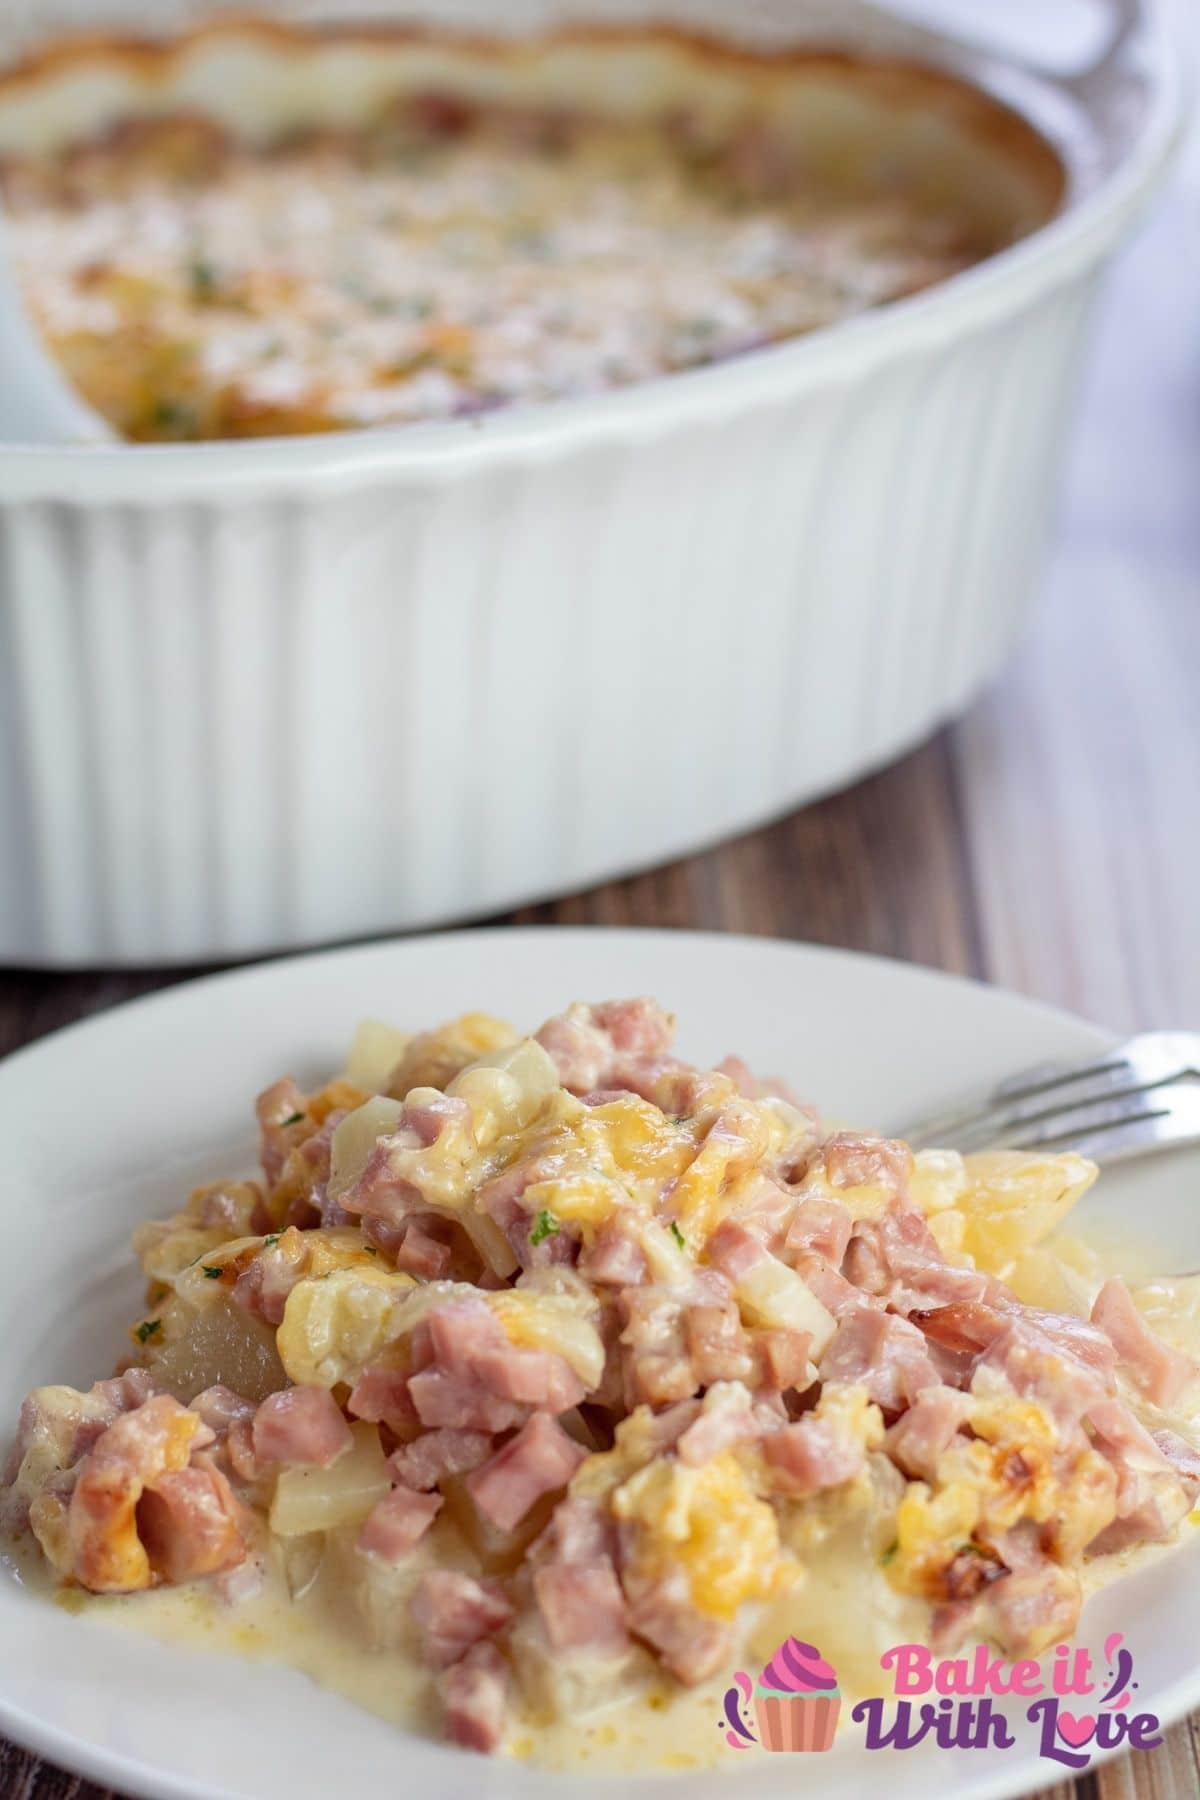 Tall image of ham & potato casserole on a white plate, with casserole in background.